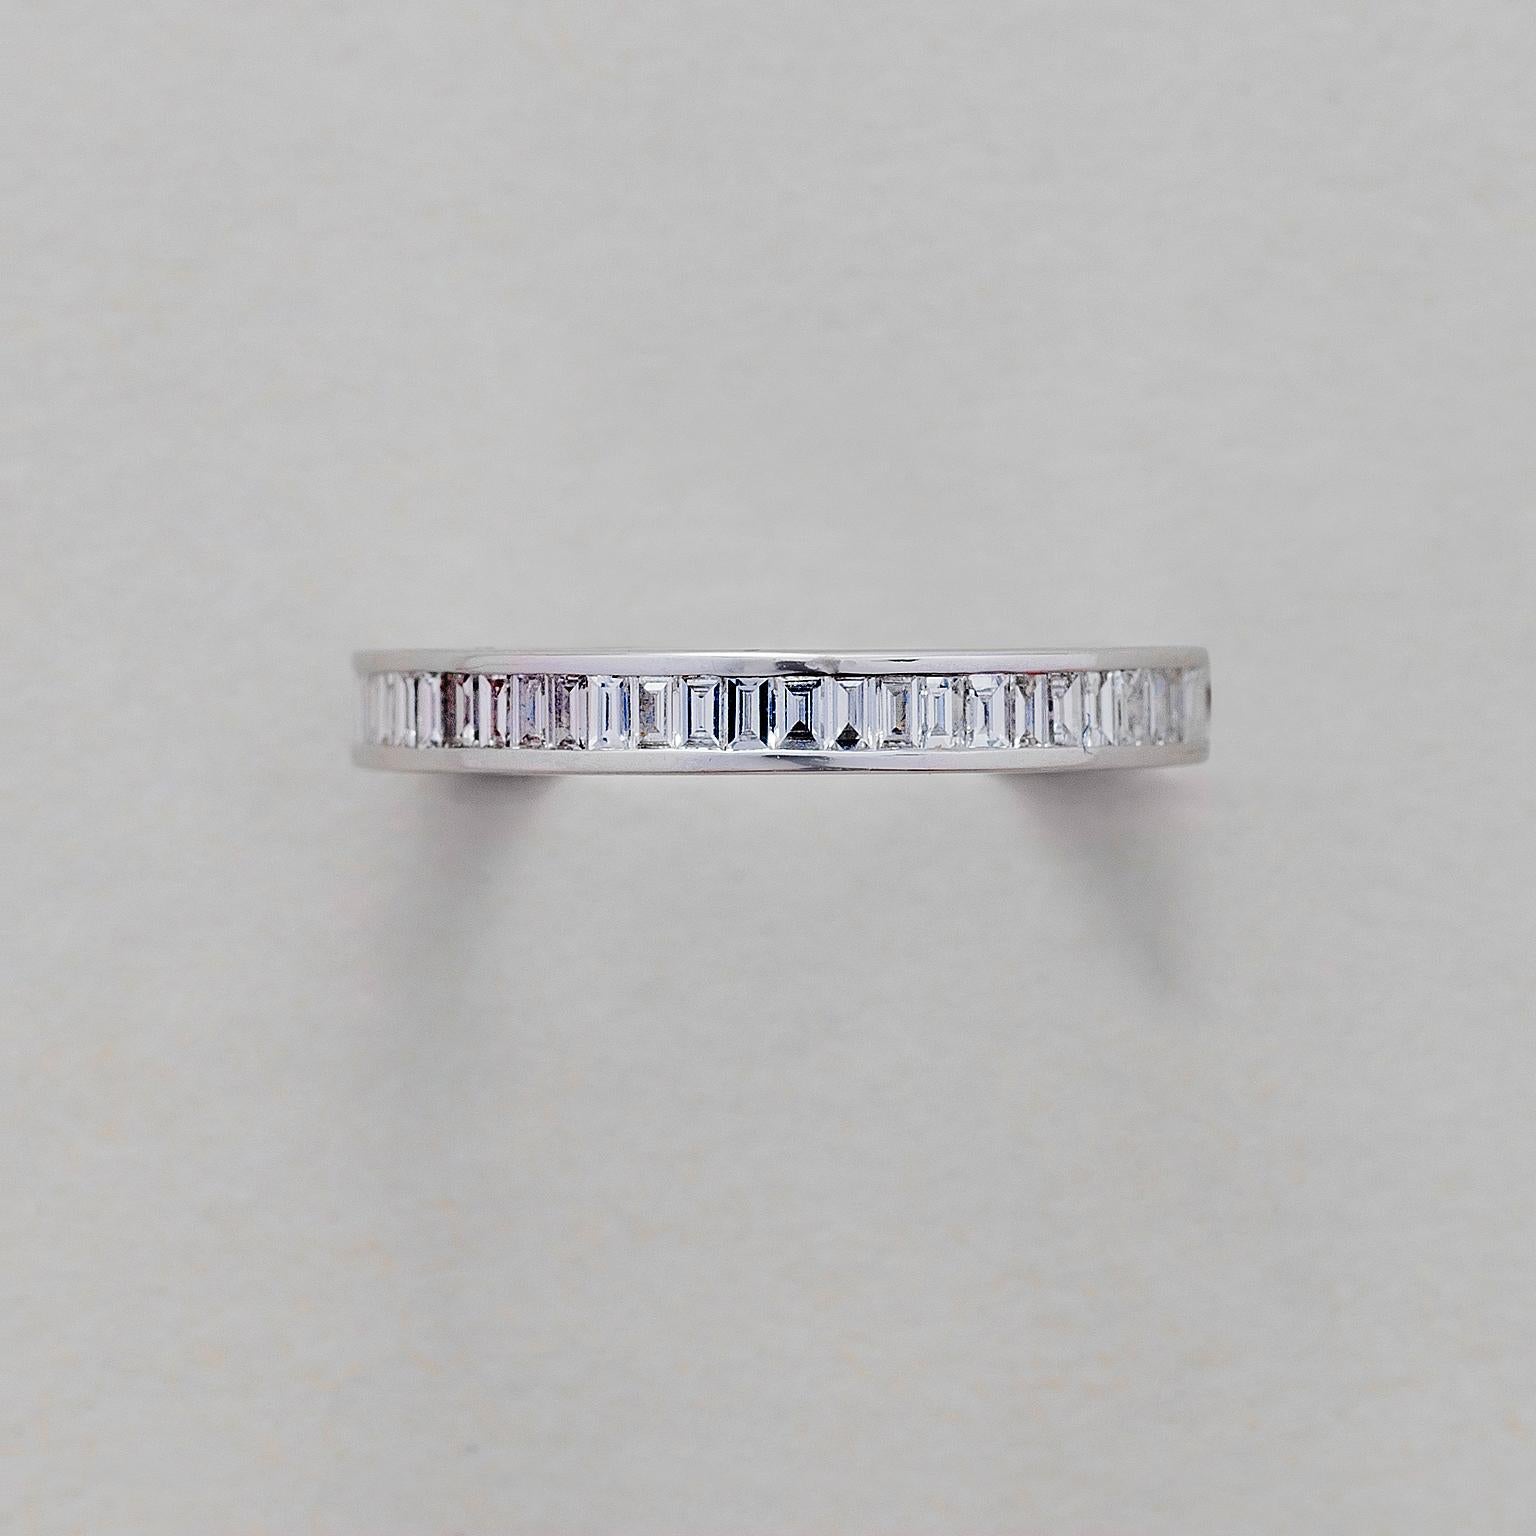 An 18 carat white gold eternity ring with baguette cut diamonds (app. 0.79 carat in total, F-G-vs), Dutch.

weight: 2.12 grams
ring size: 17 mm / 6 ½ US
width: 2.87 mm